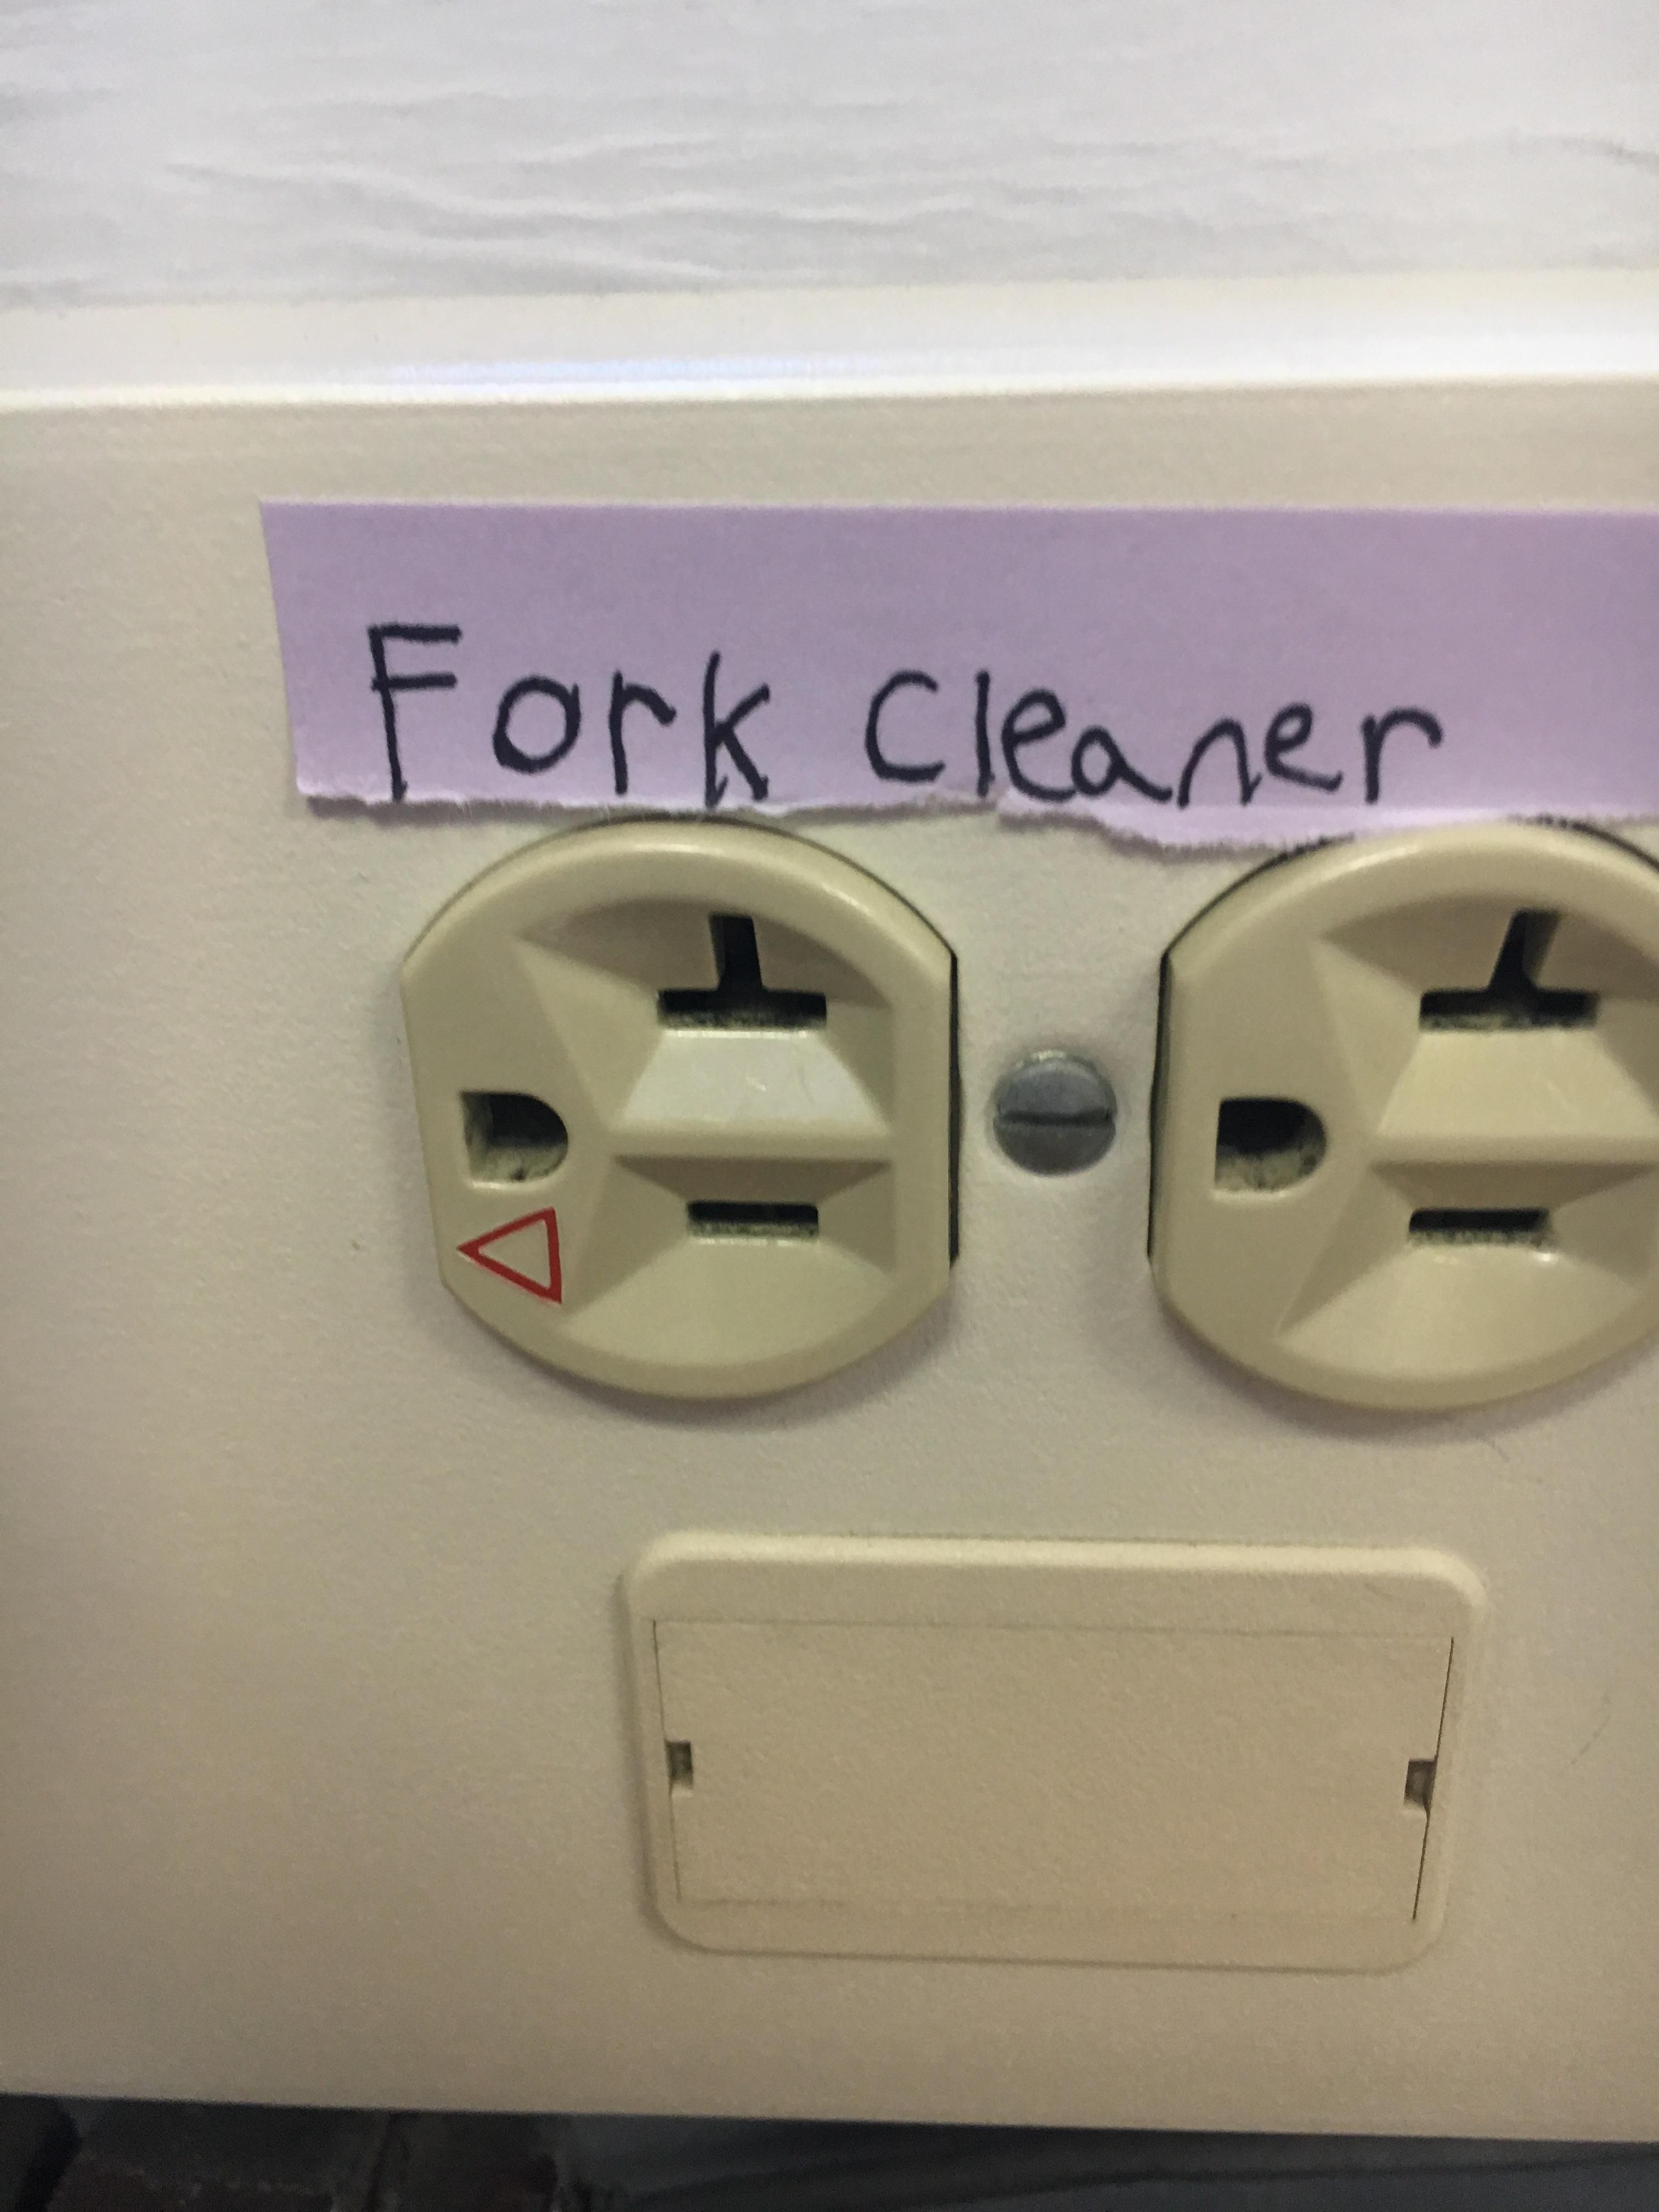 Someone put a helpful label on the electrical outlet at school.